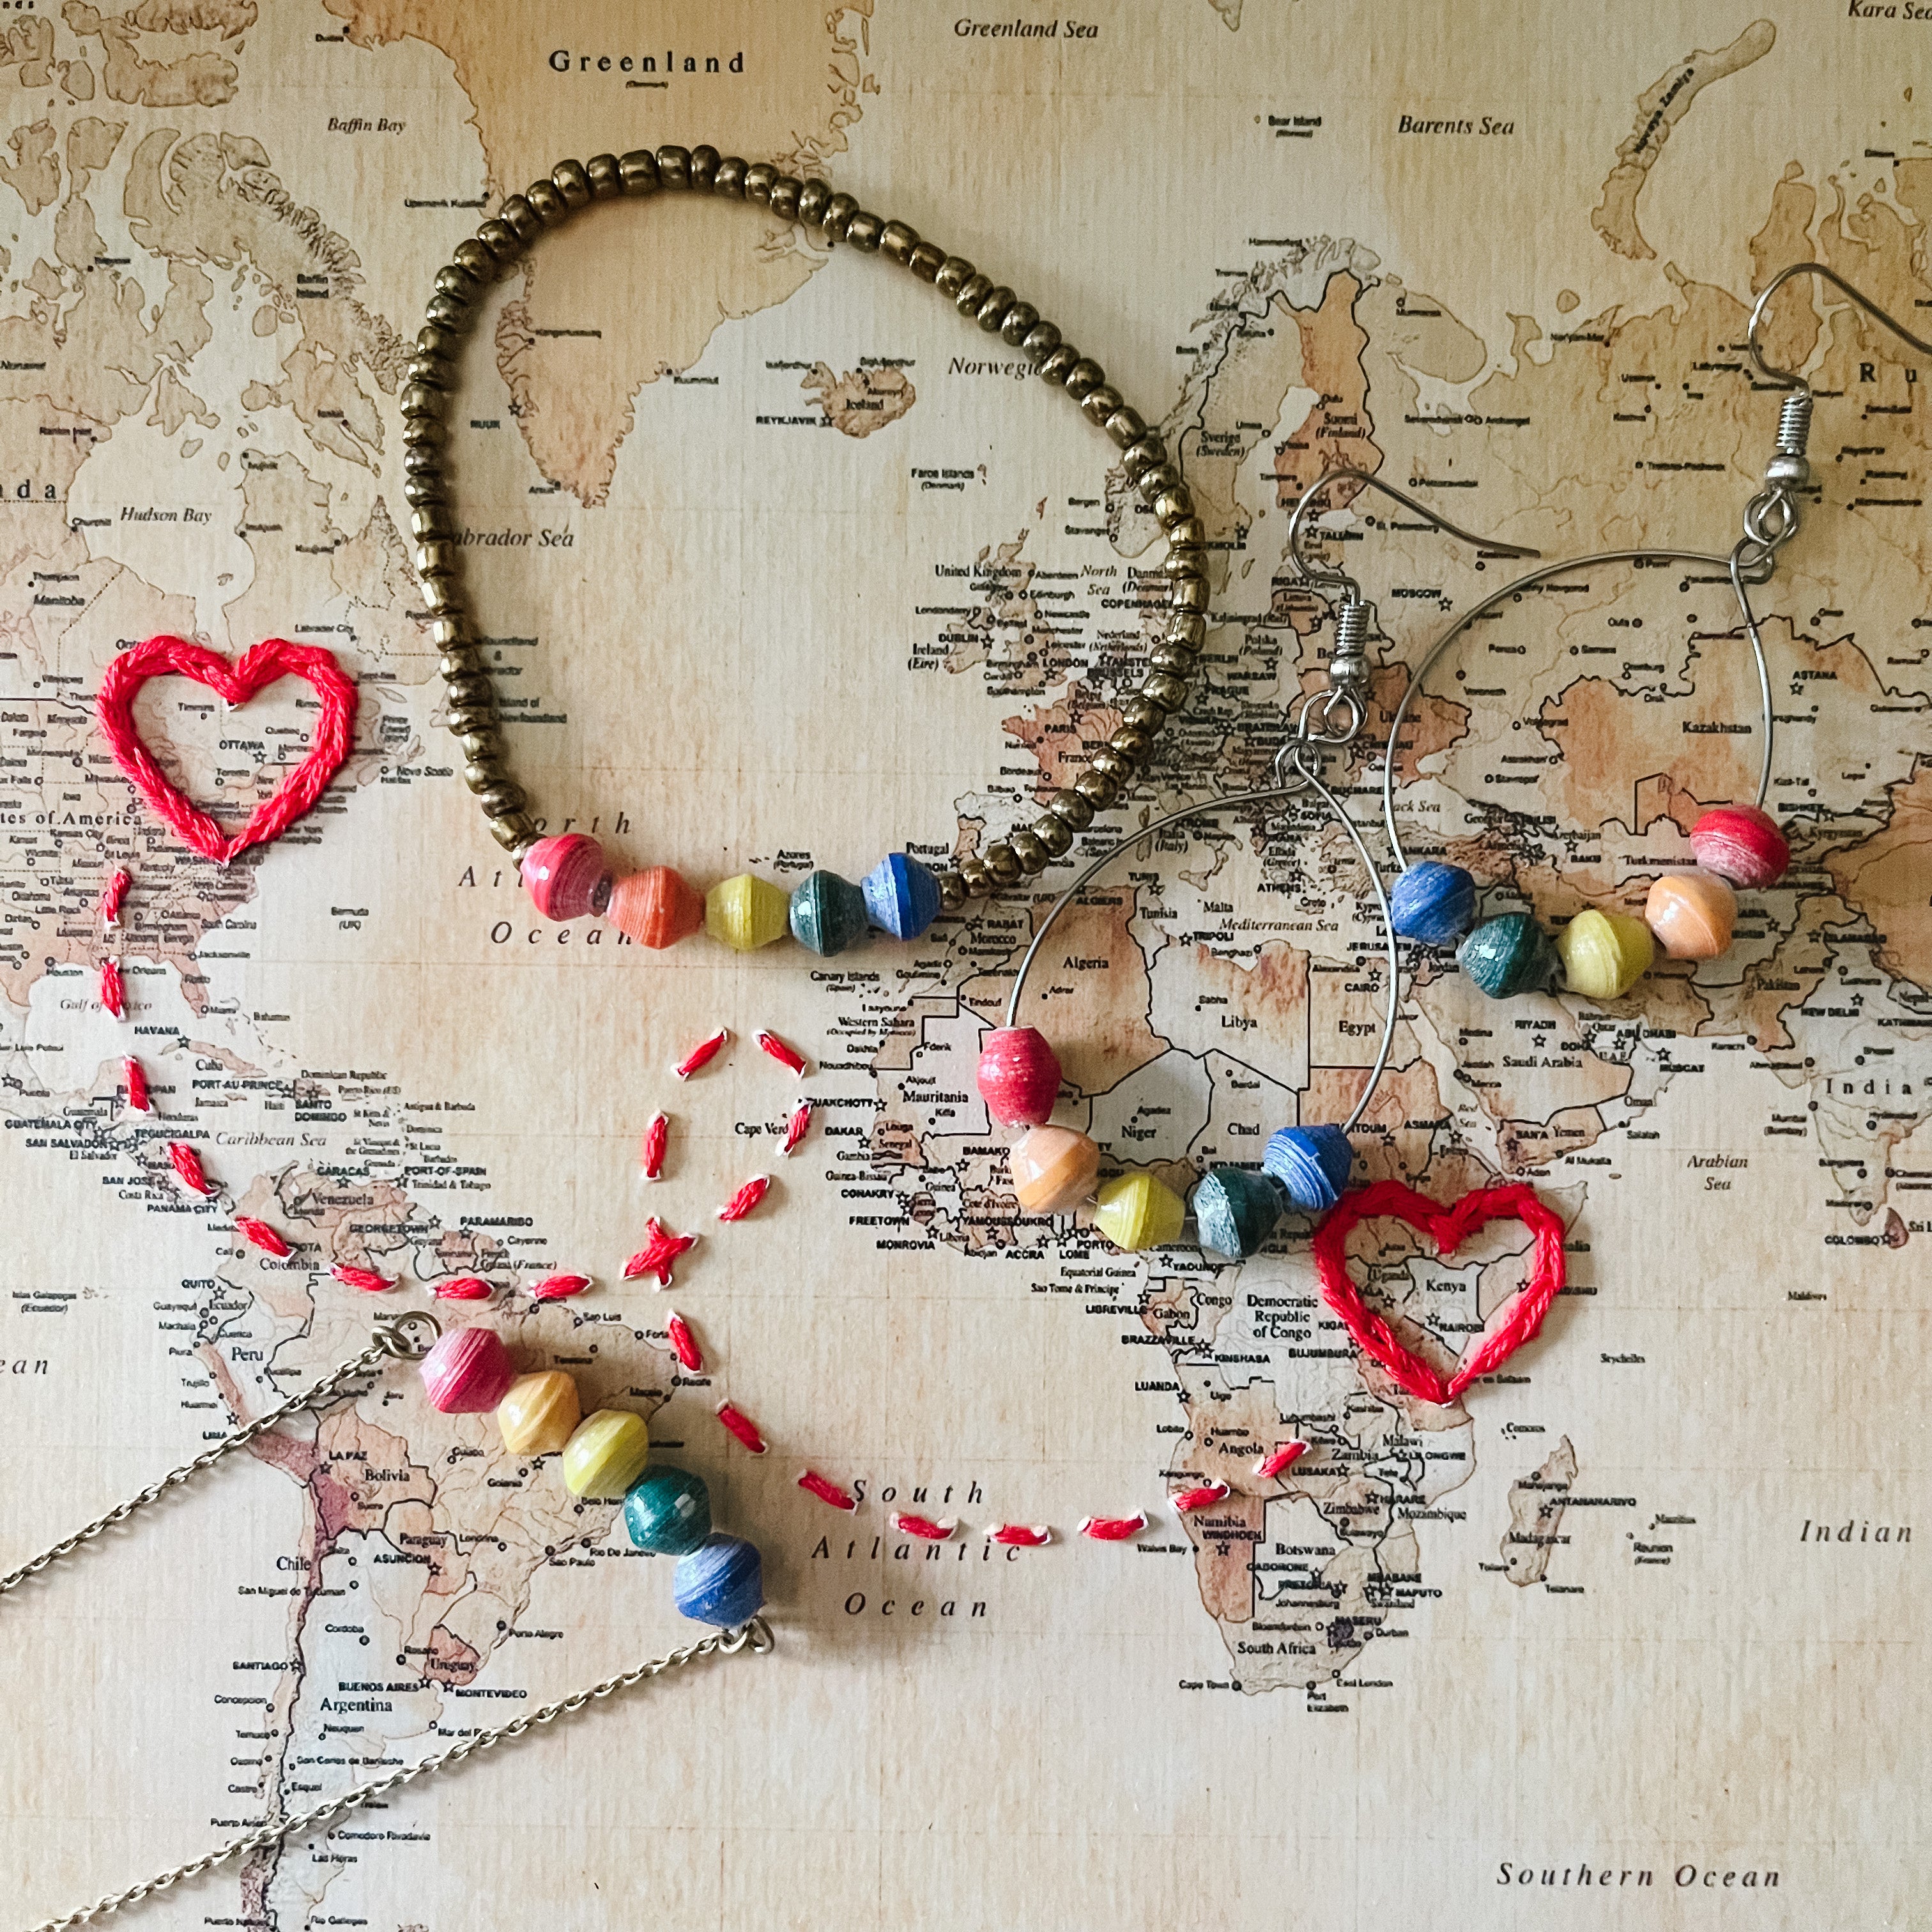 JustOne's simple bracelet with five beads to make a rainbow handmade in Uganda